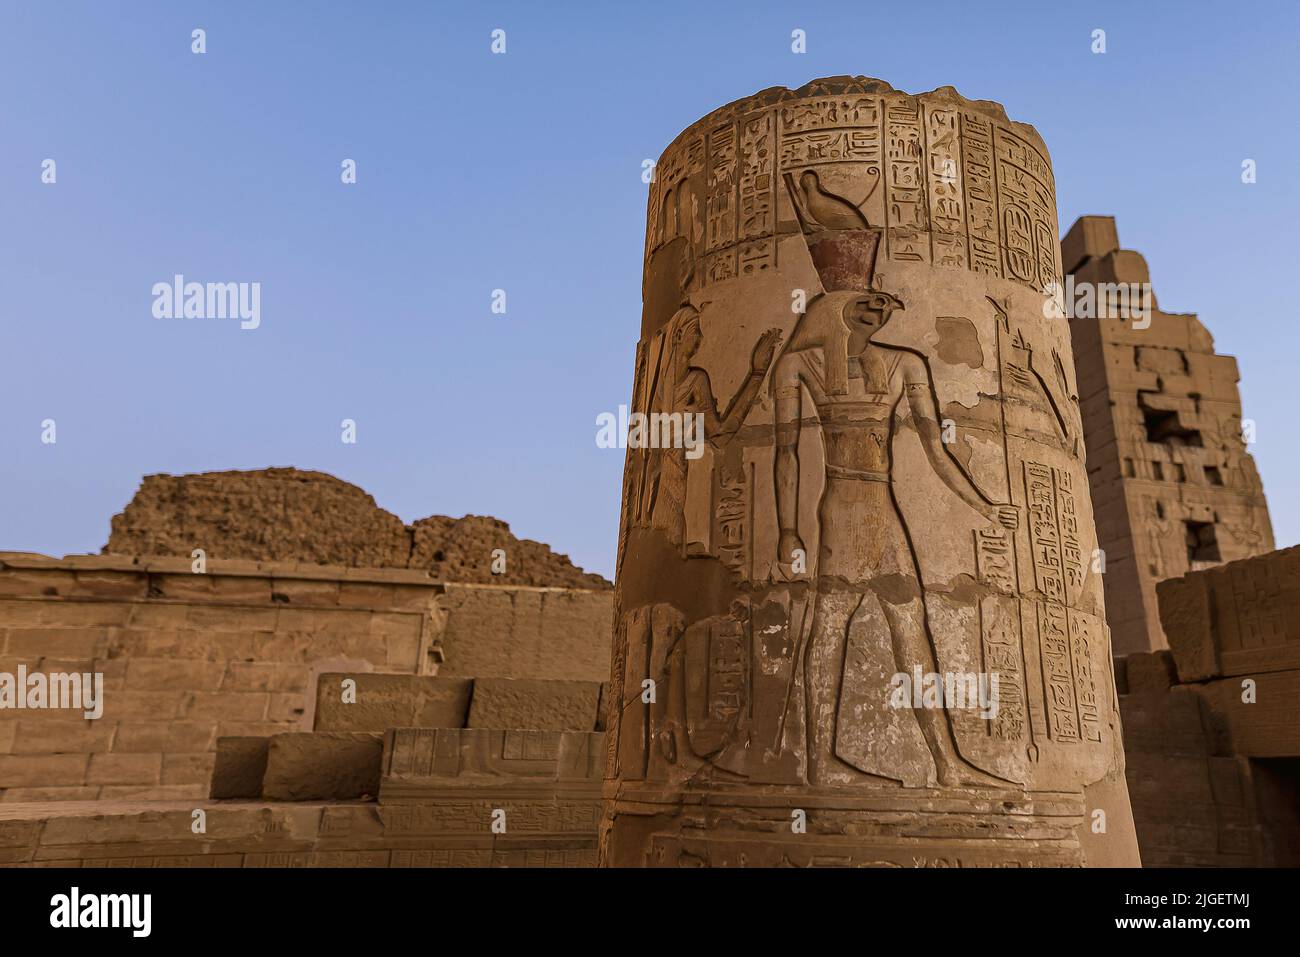 relief of the egyptian God Horus on a column at the temple of Kom Ombo, Egypt, Oktober 23, 2018 Stock Photo